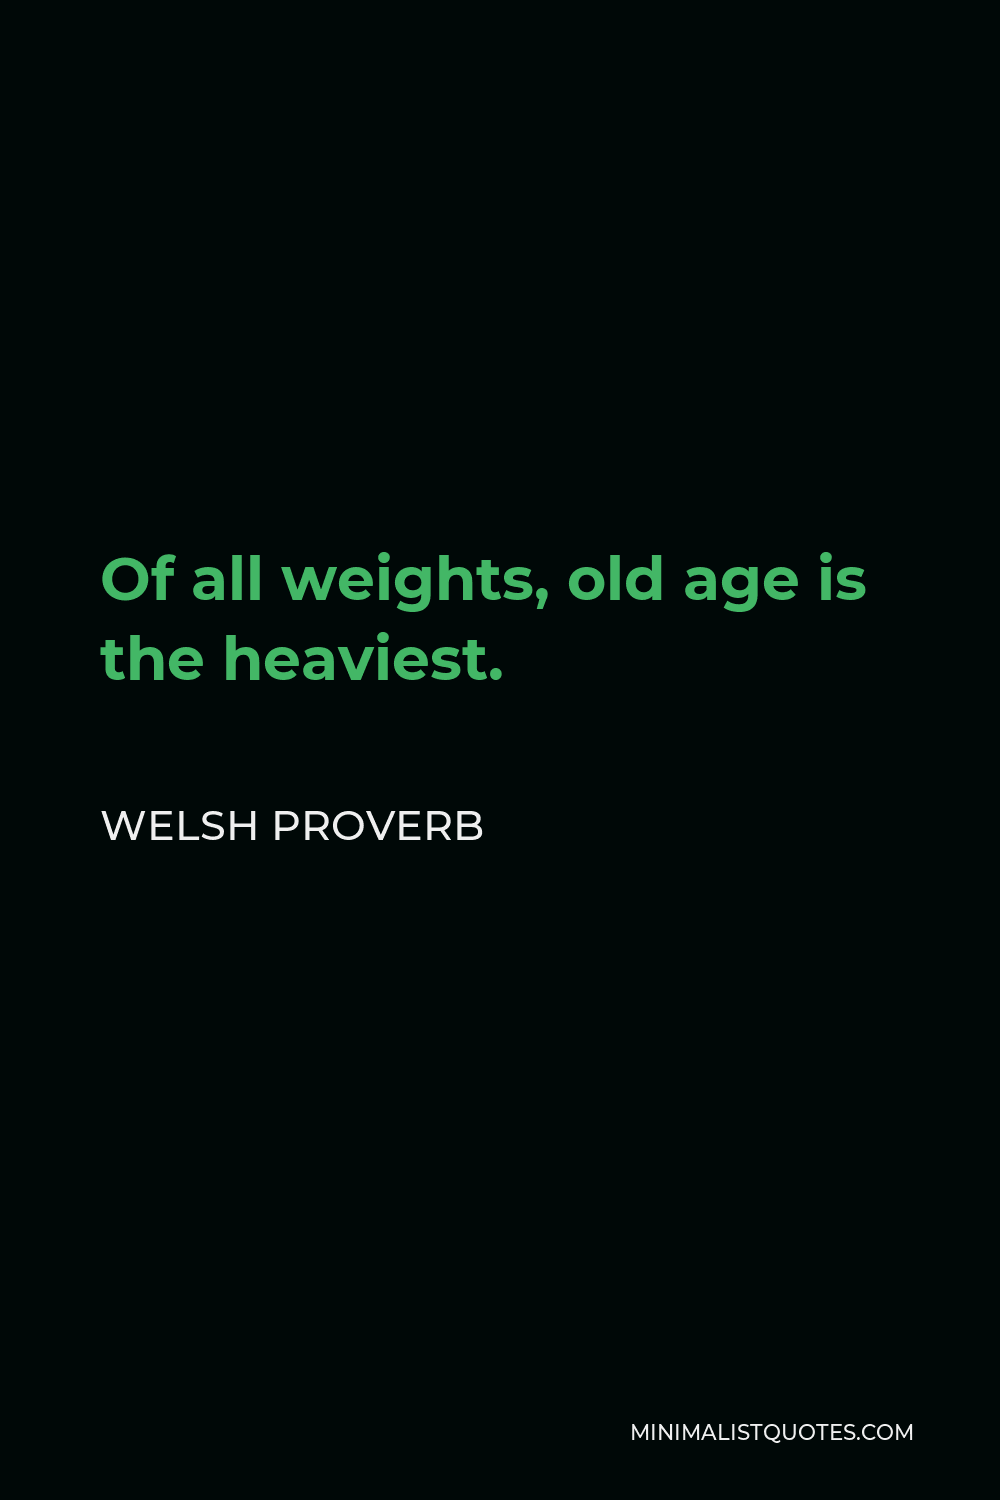 Welsh Proverb Quote - Of all weights, old age is the heaviest.